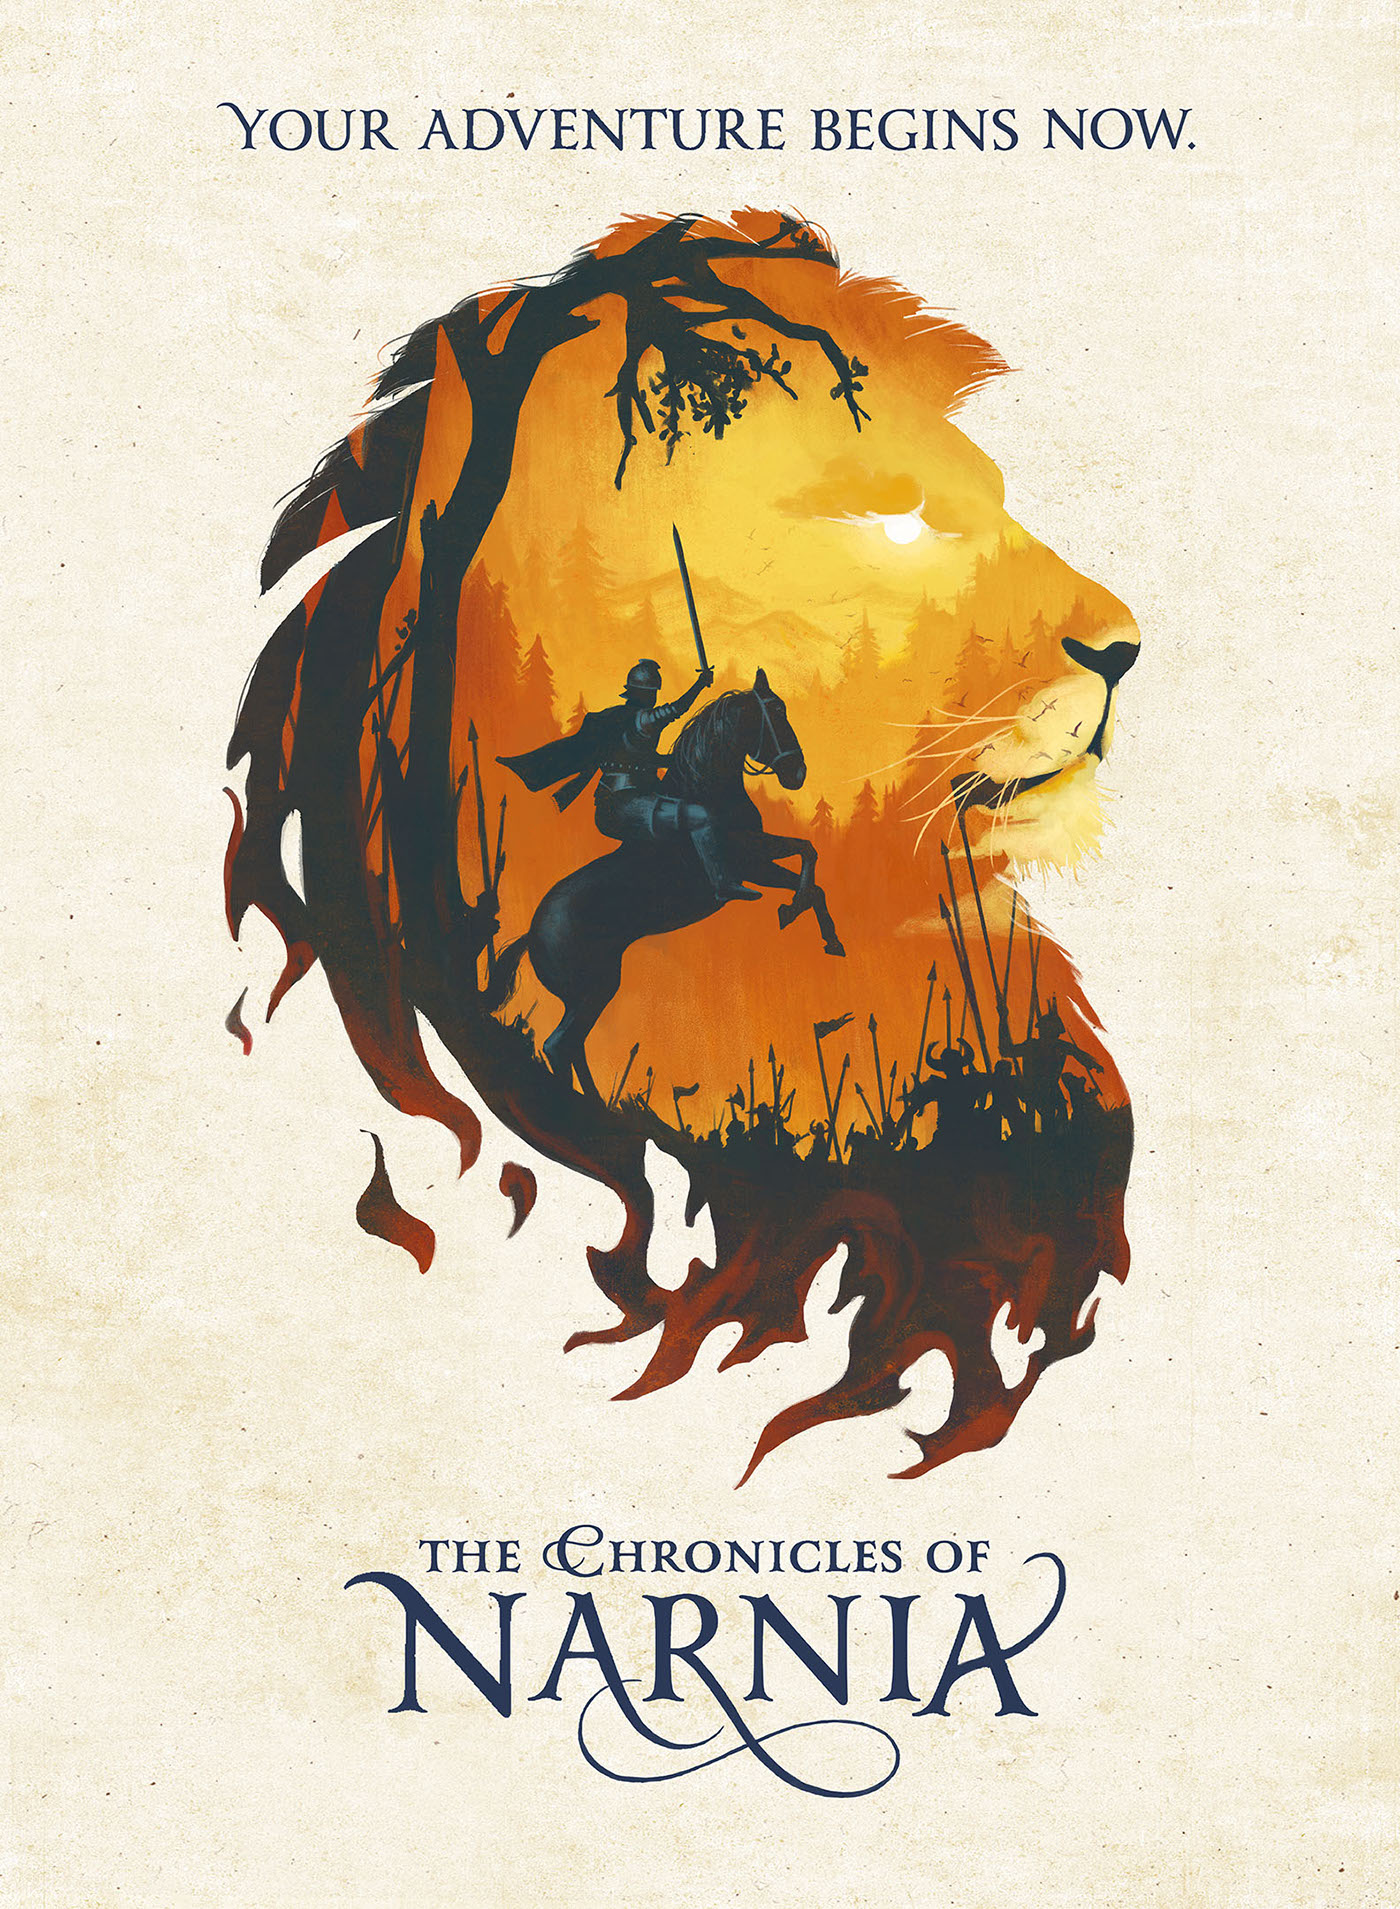 The Chronicles of Narnia Poster | Behance